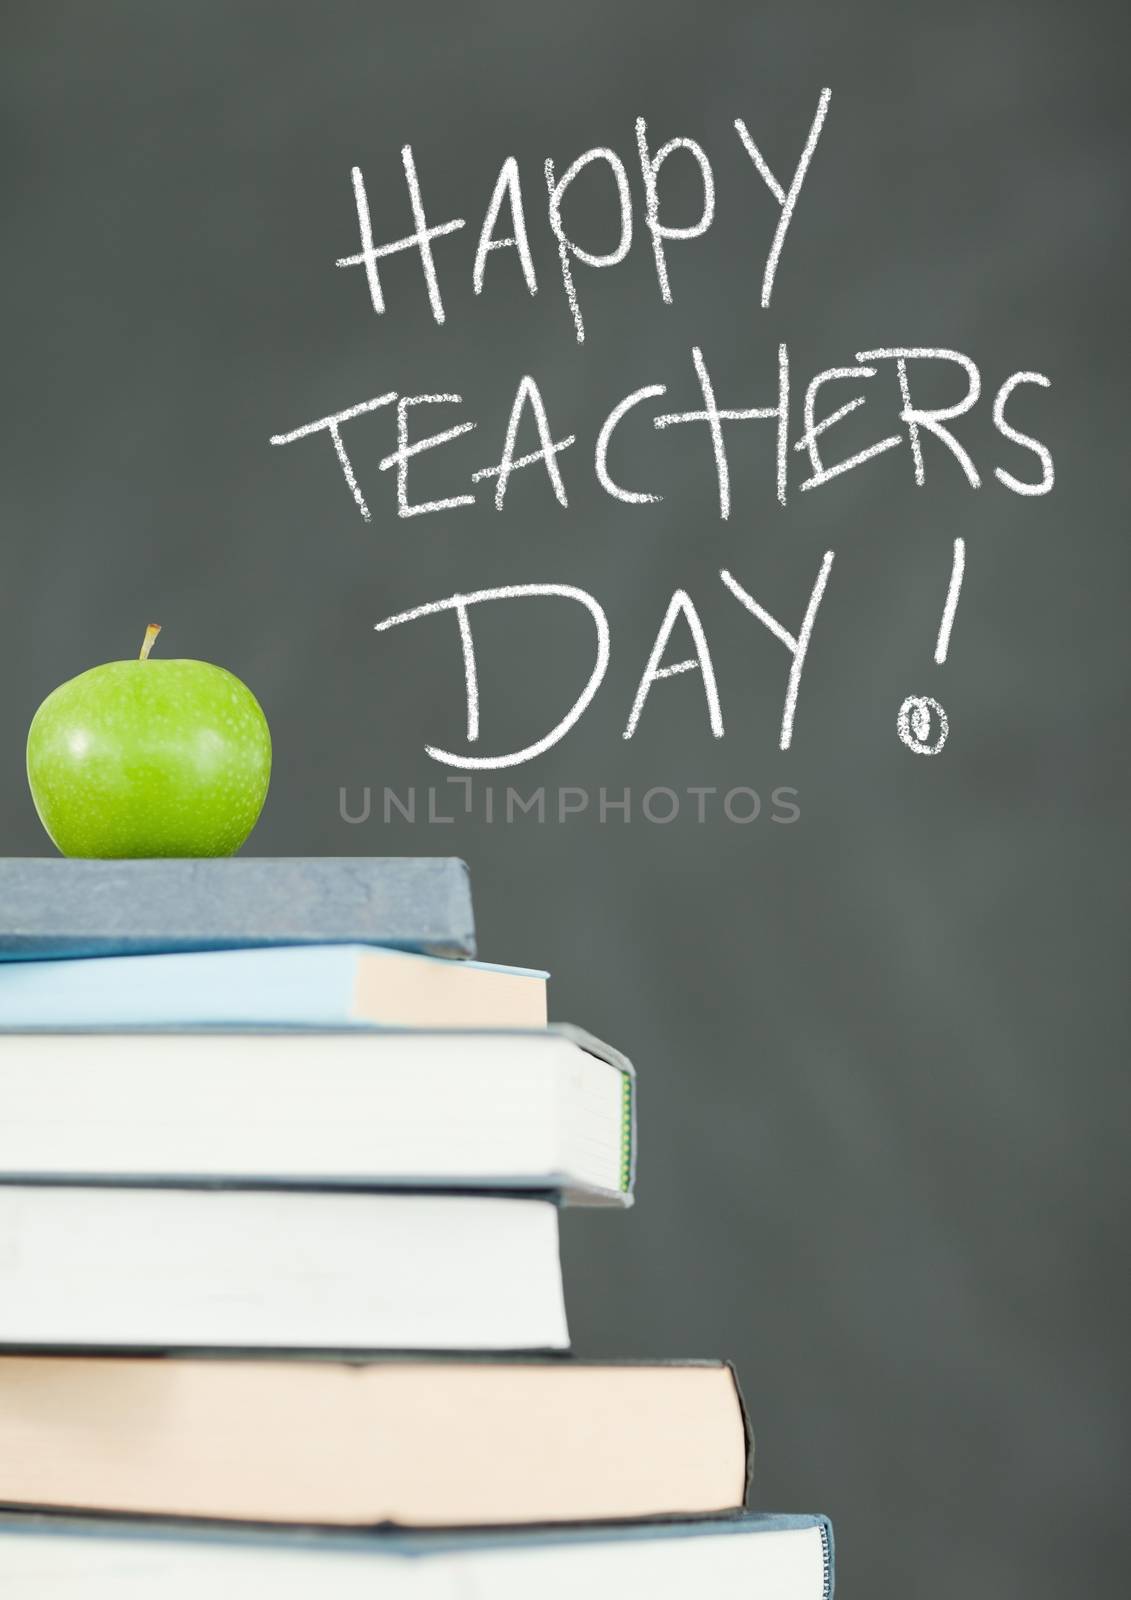 Happy teachers day on education blackboard with books and apple by Wavebreakmedia